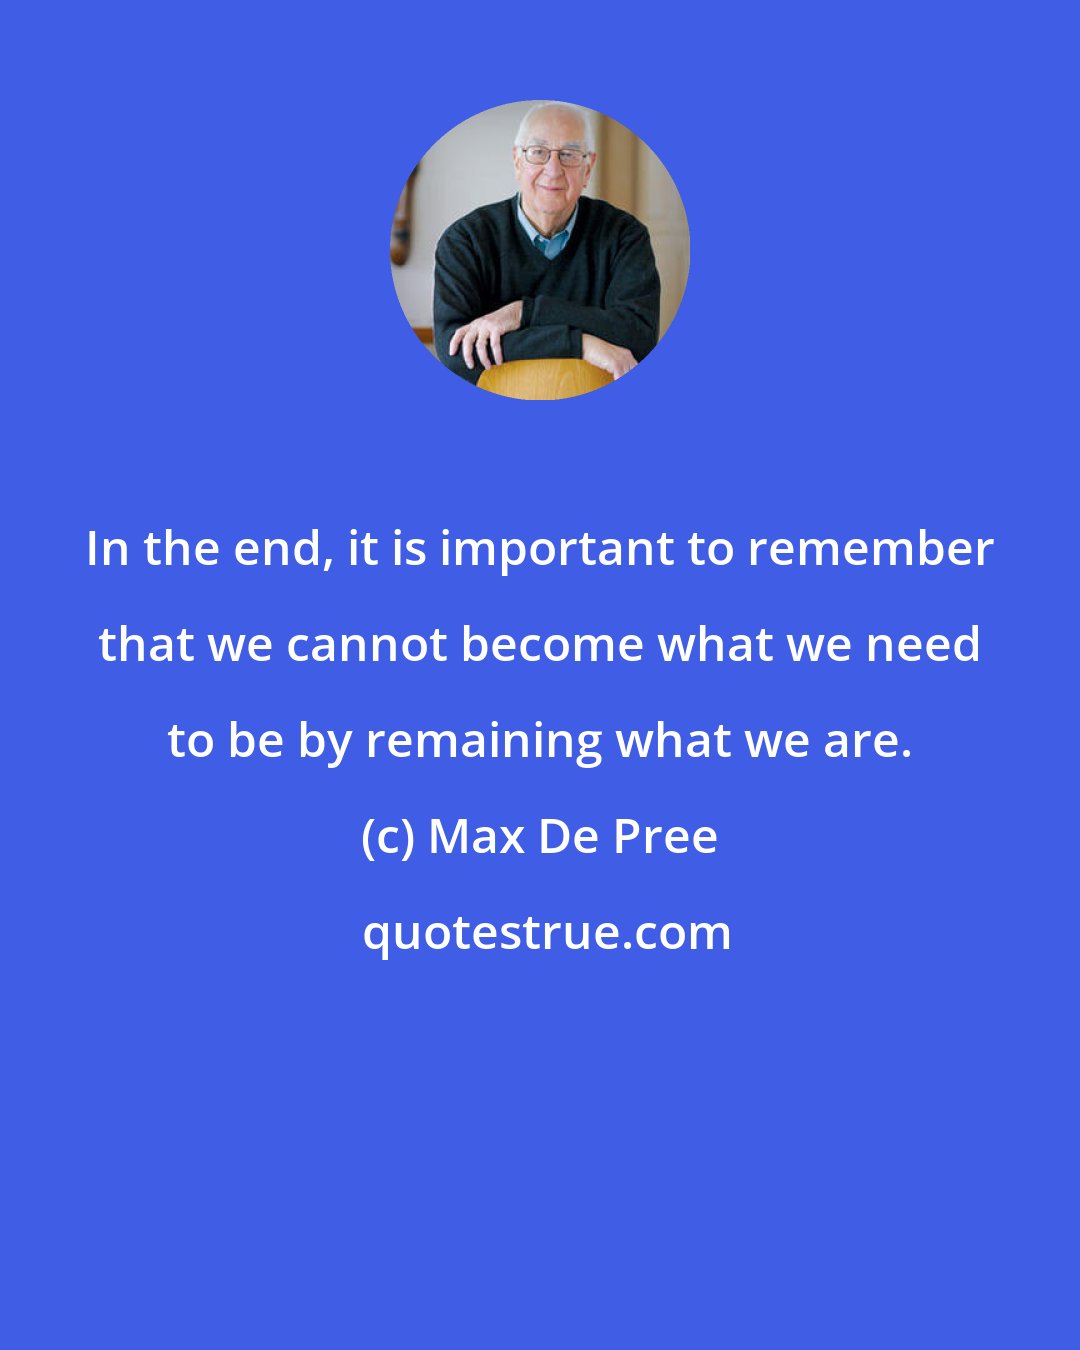 Max De Pree: In the end, it is important to remember that we cannot become what we need to be by remaining what we are.